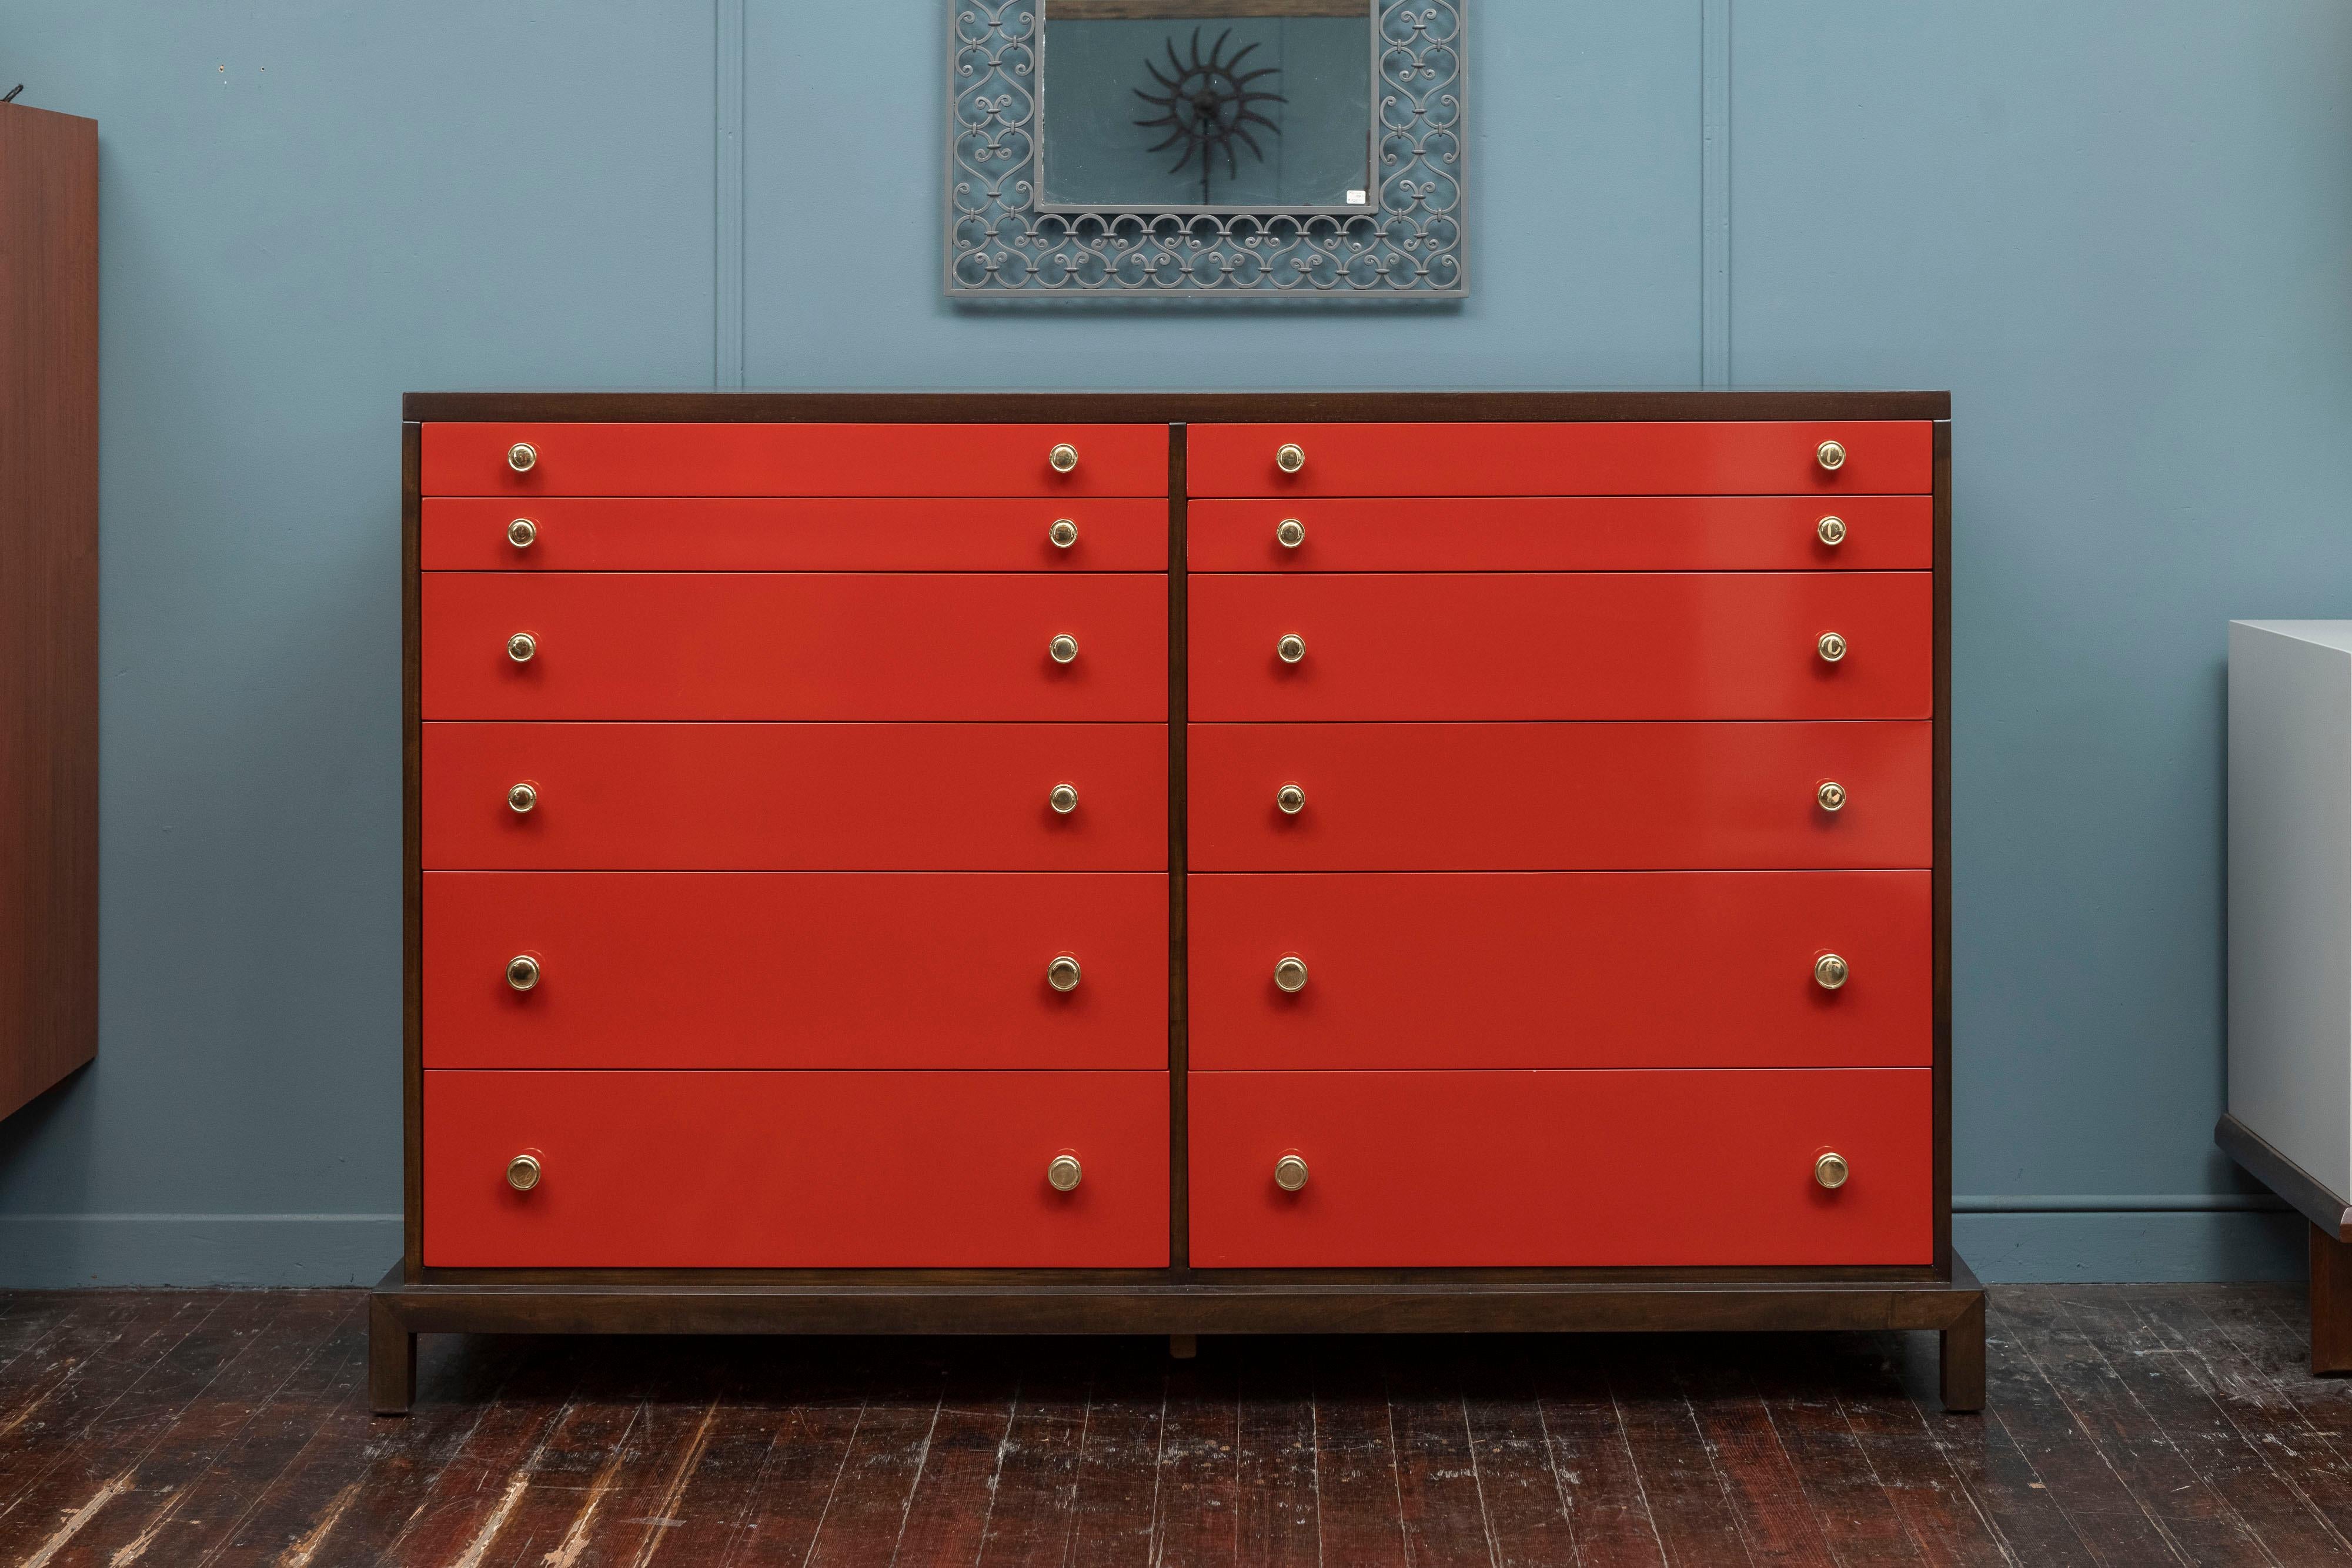 Widdicomb tall double dresser with twelve drawers fitted with dividers for organization. Newly refinished mahogany case in a expresso walnut semi-gloss finish and Chinese red lacquered drawers. All brass pulls have been professionally polished and